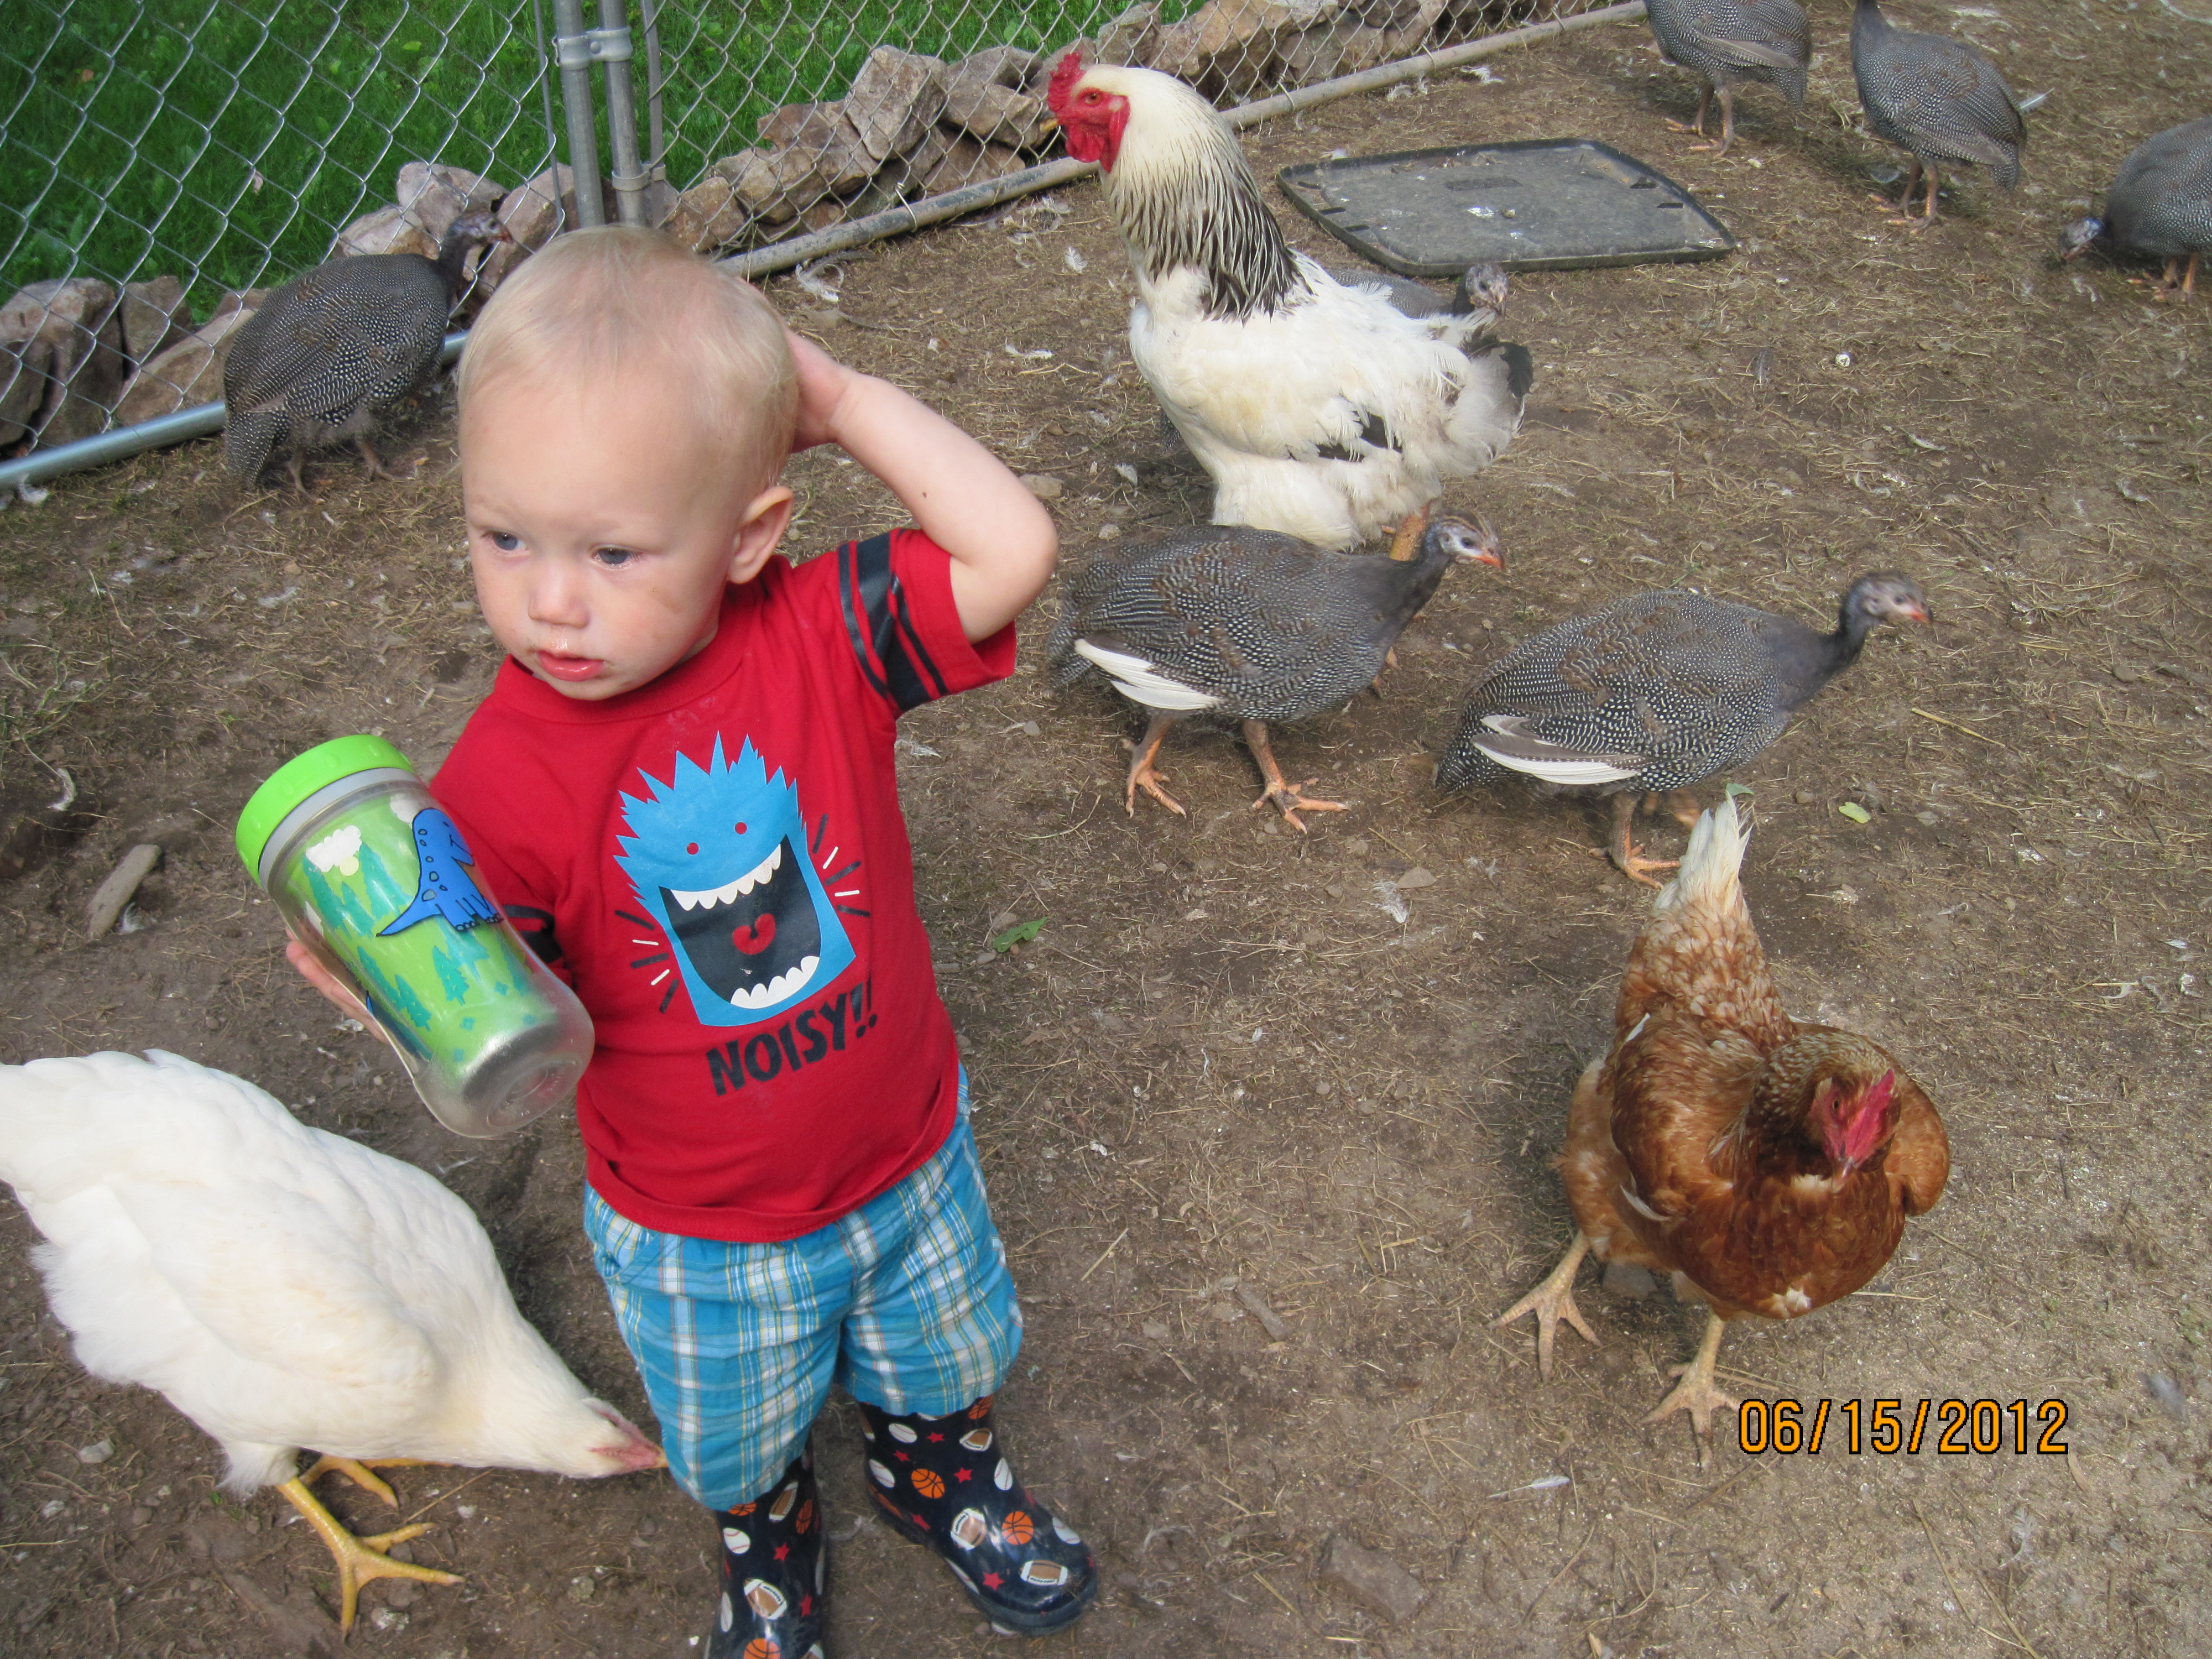 Pic of my grandson with various babies.. and of course Bob the roo!